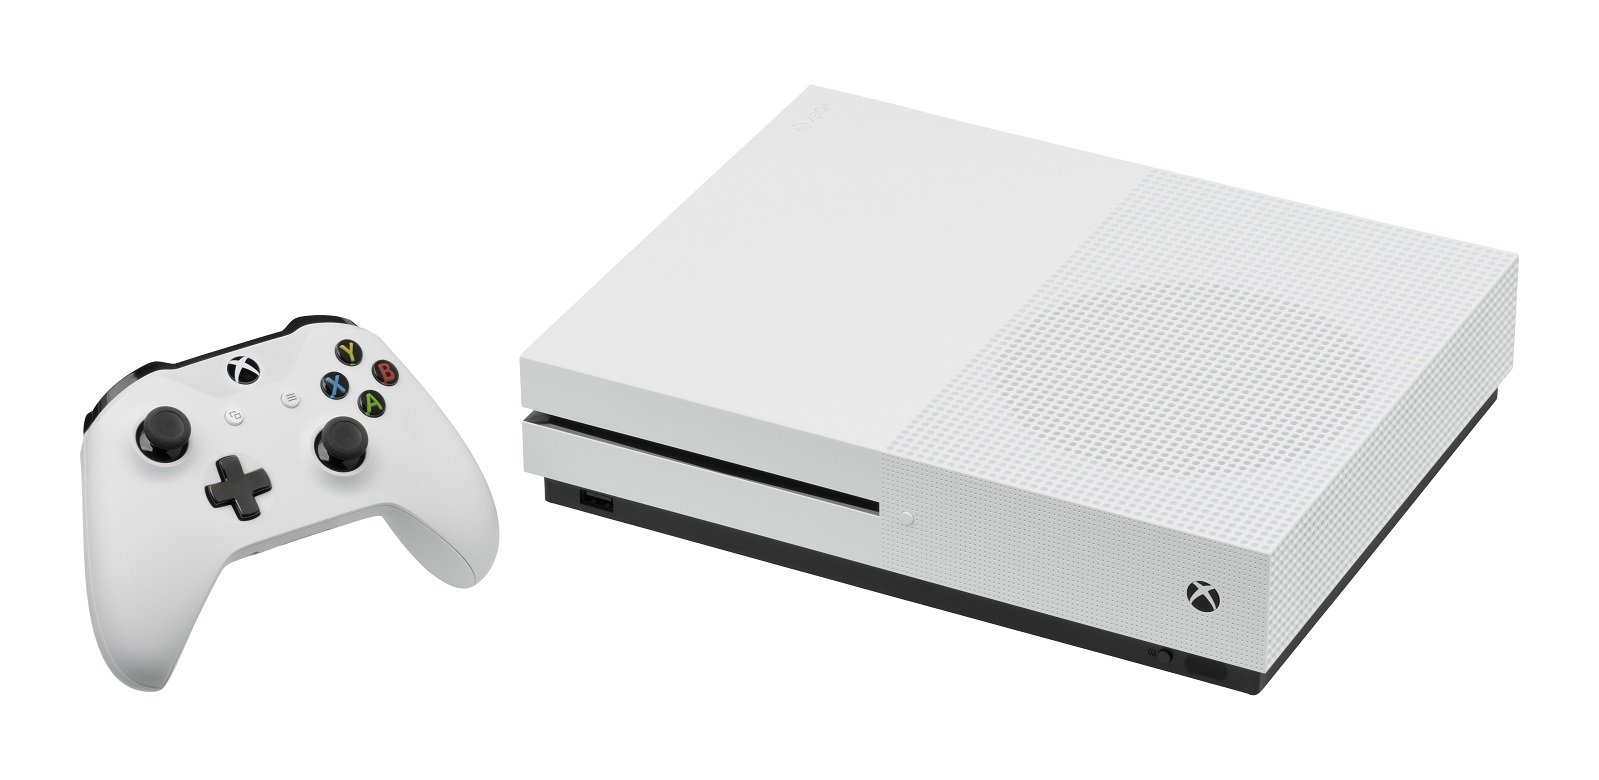 Some New Details Emerge Regarding Microsoft’s Xbox Two Console Release